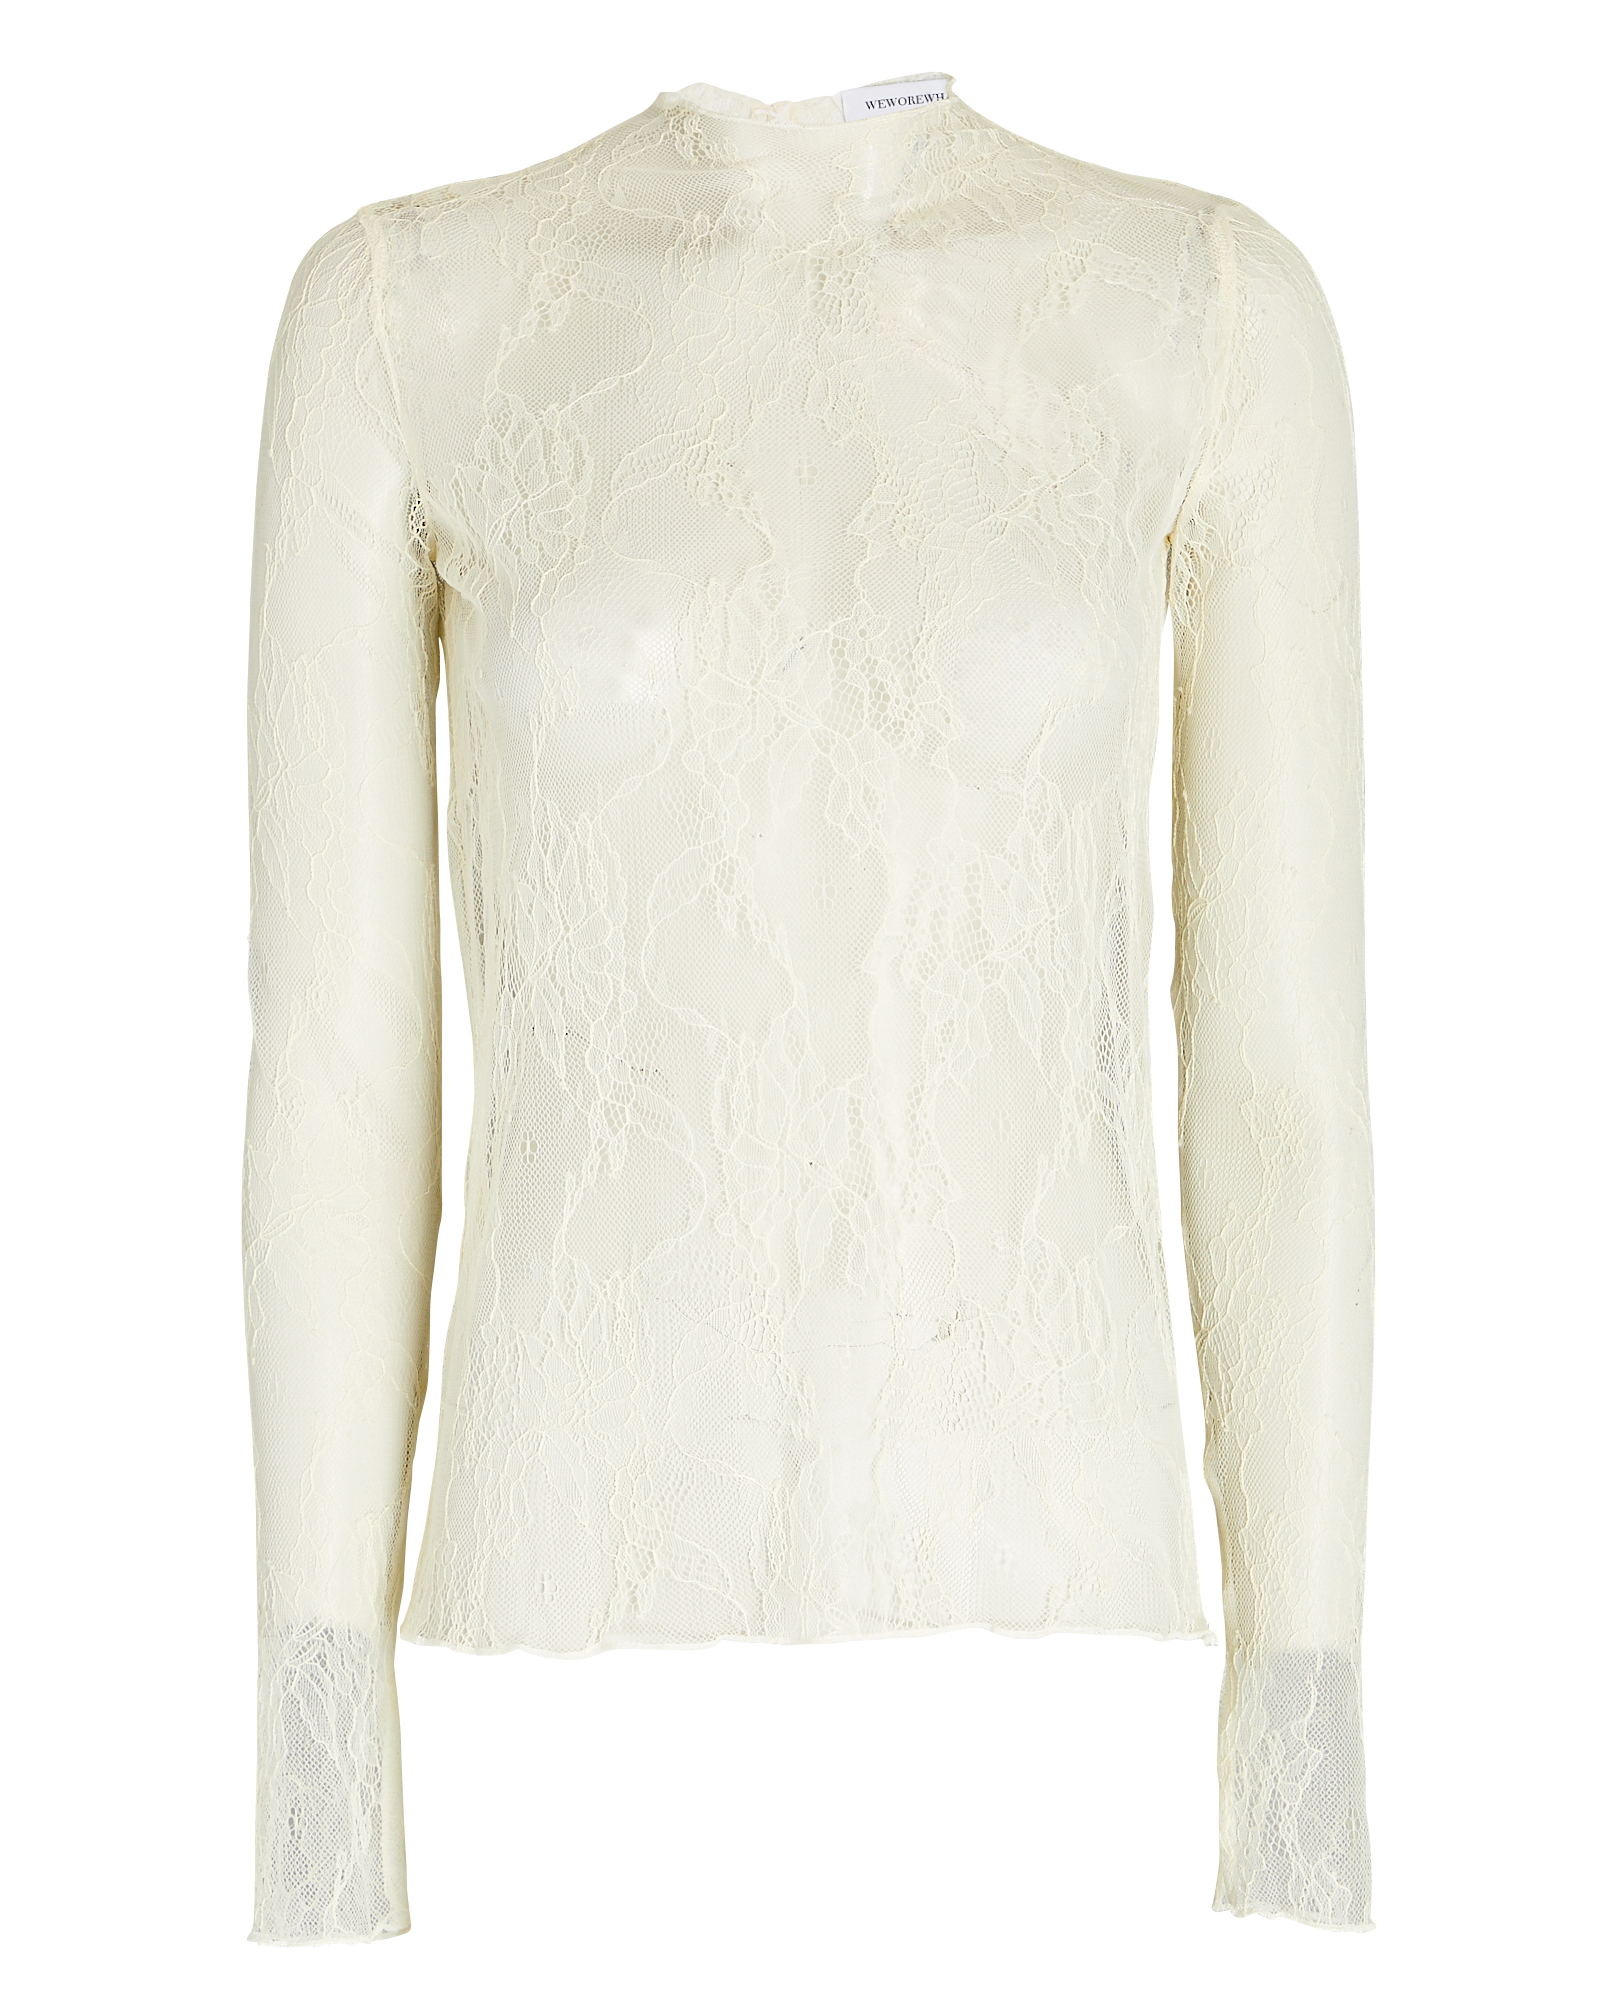 WeWoreWhat Chantilly Lace Top In Ivory | INTERMIX®